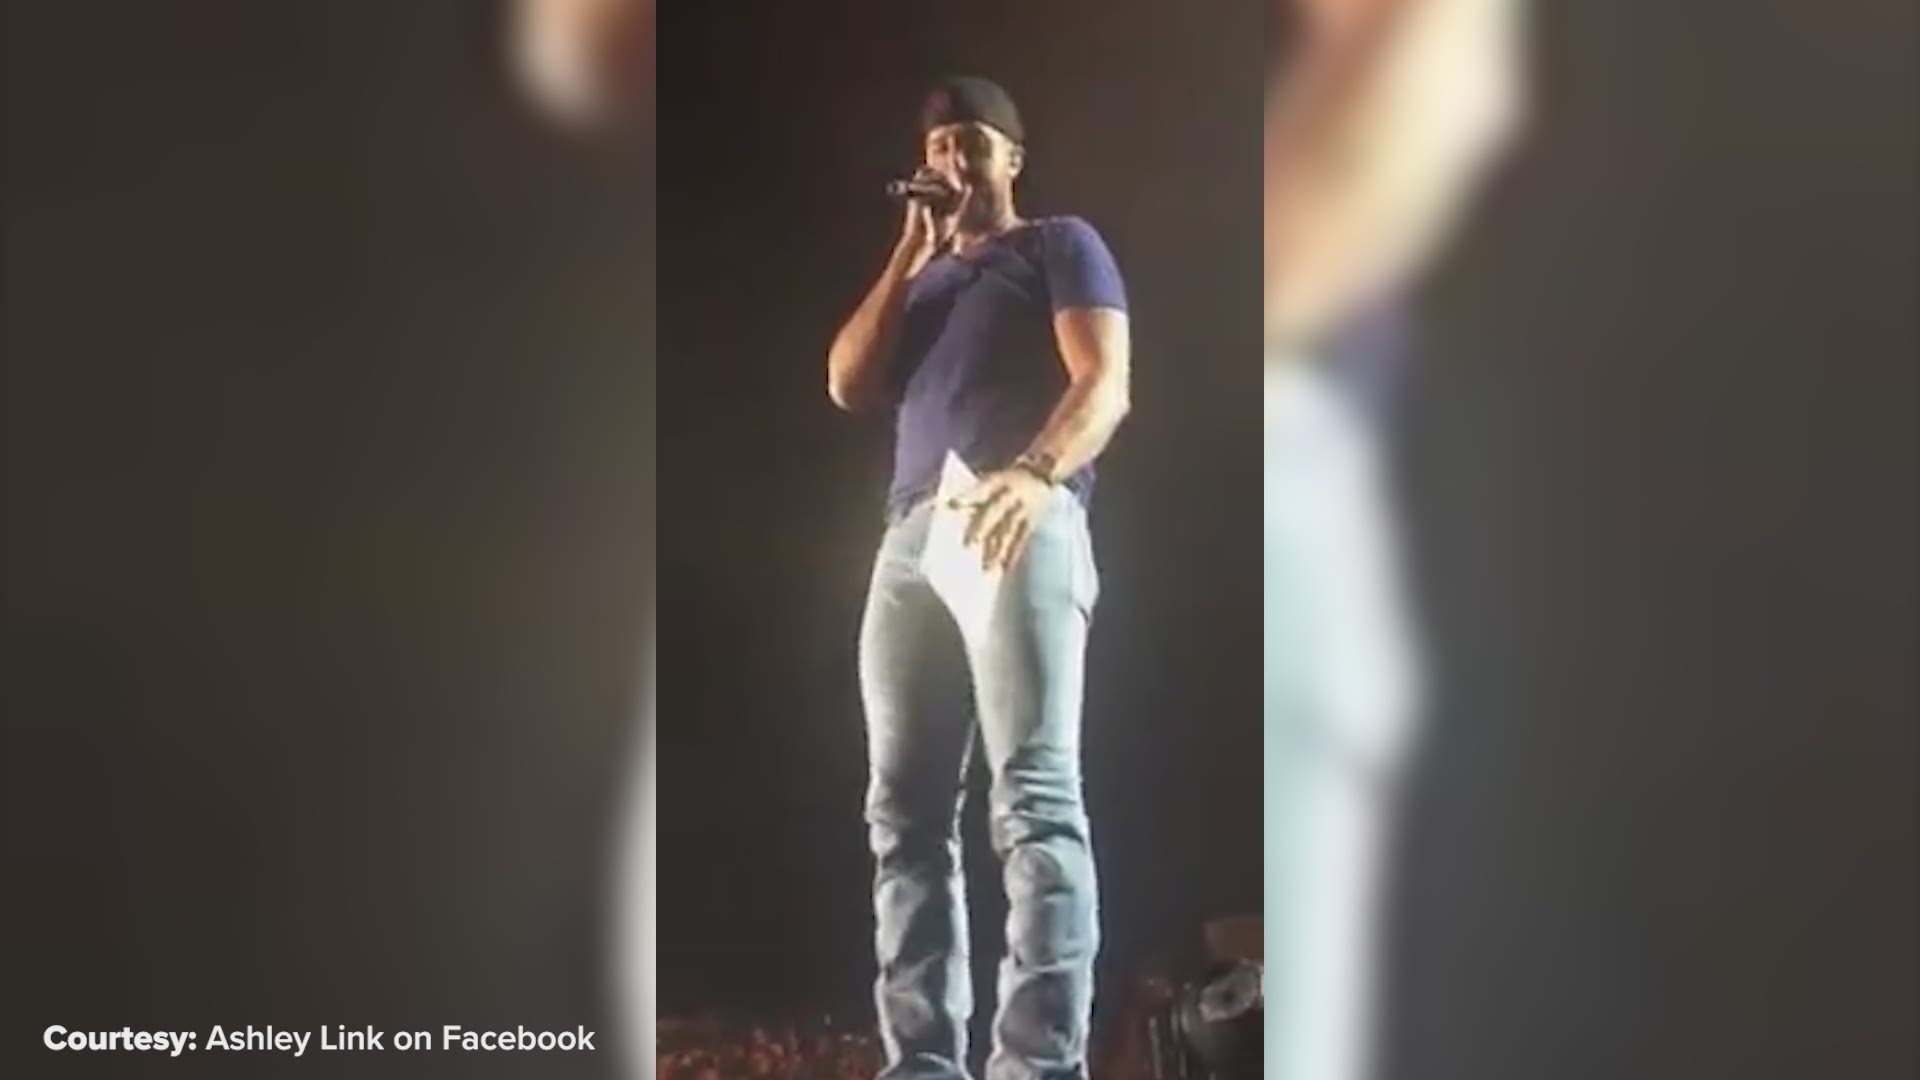 One gutsy Arkansas couple found a way to have country music singer Luke Bryan announce their gender reveal while on stage at his concert.